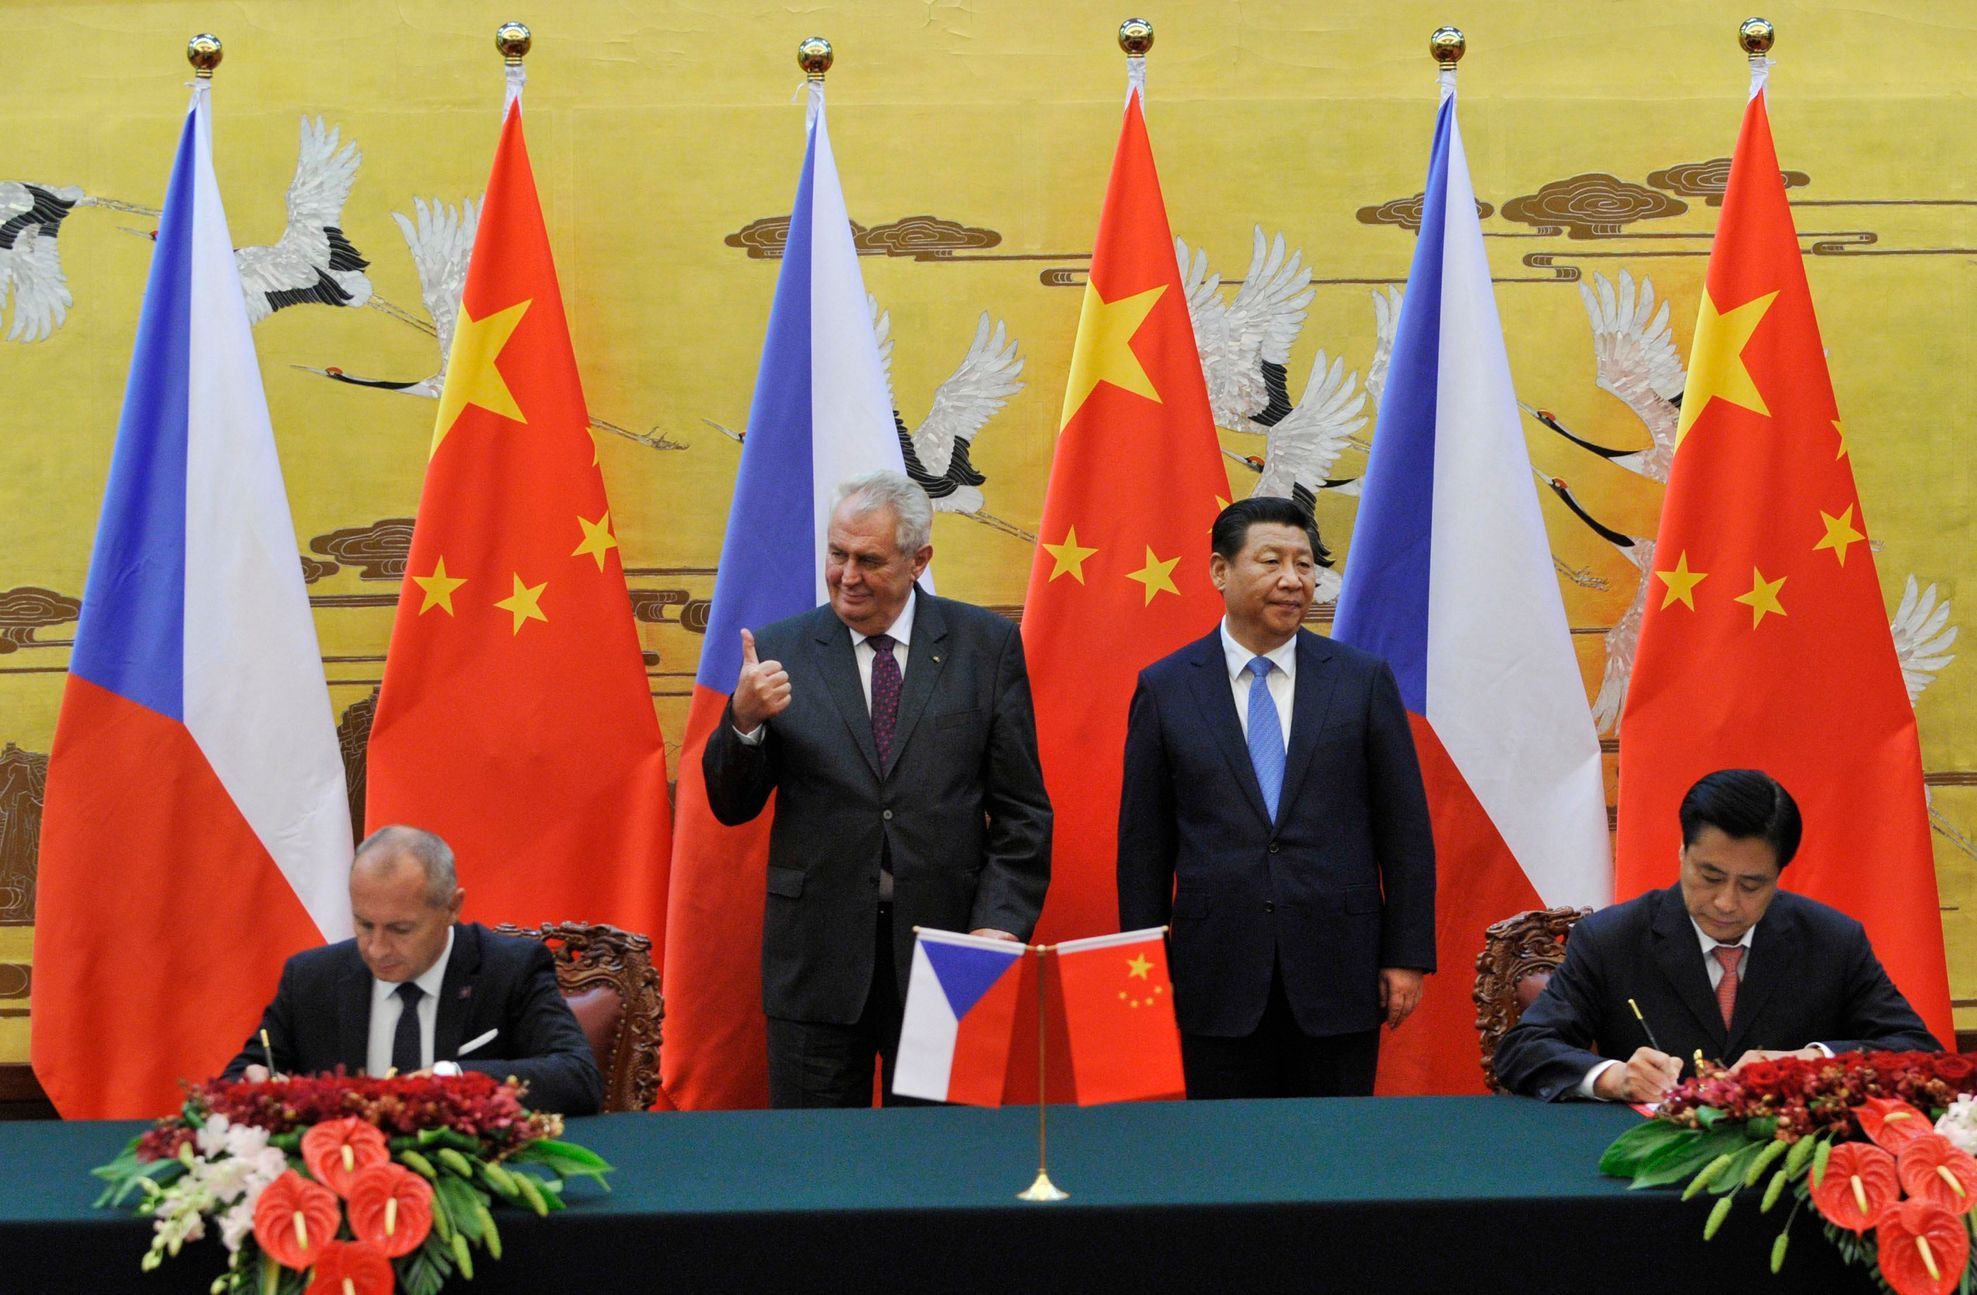 Czech Republic's President Zeman gestures during a signing ceremony with China's President Xi at the Great Hall of the People in Beijing